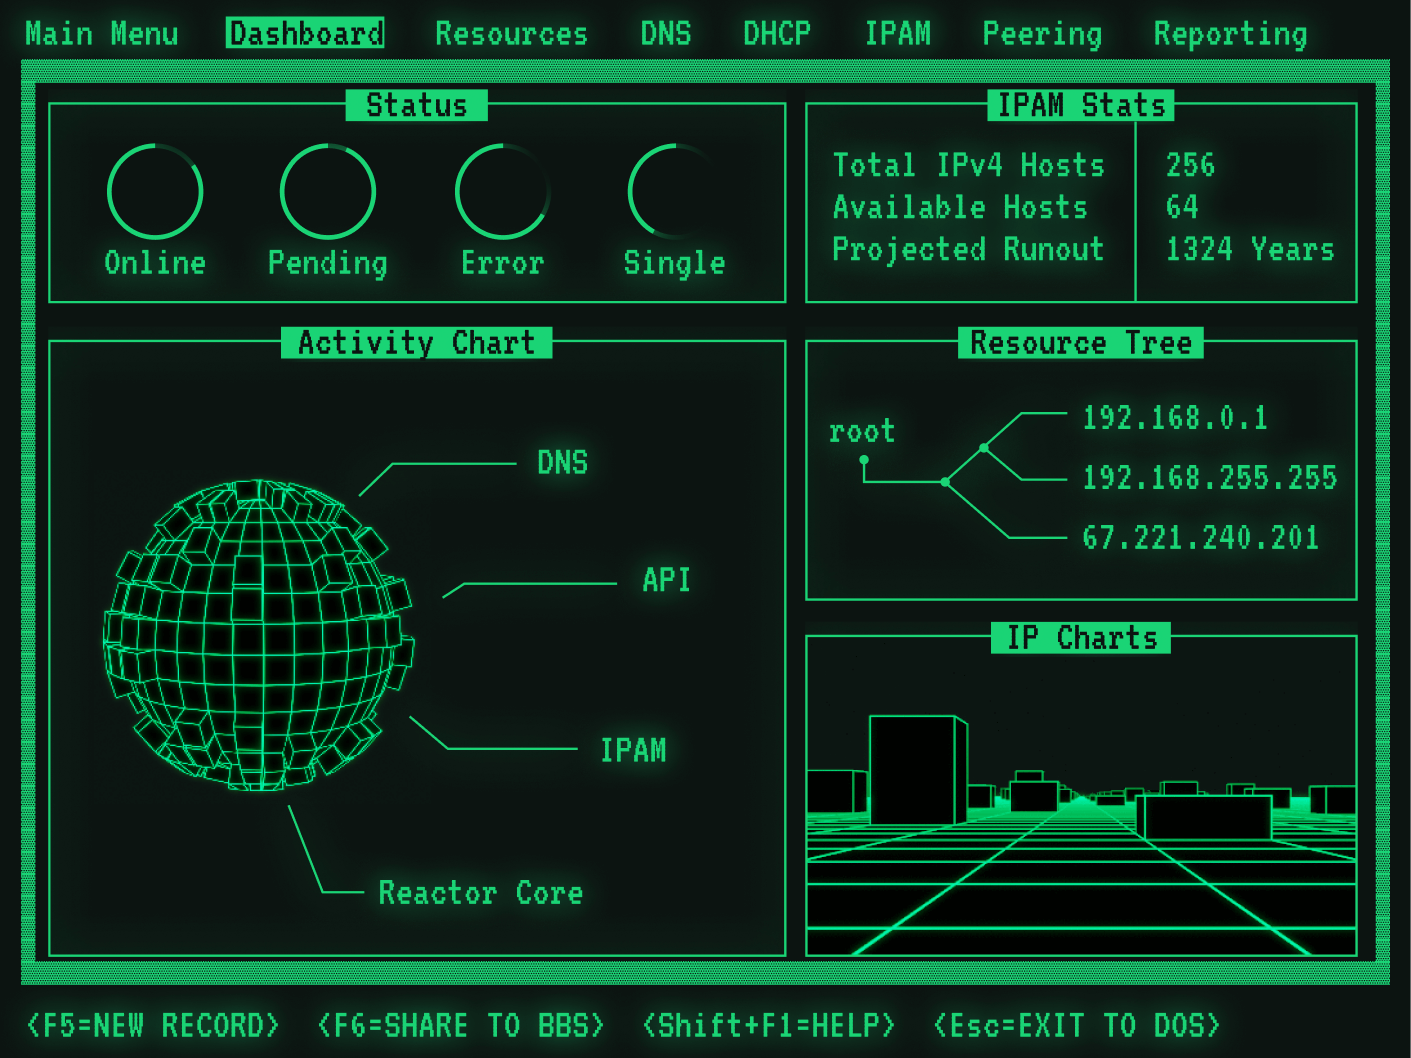 Dashboard screen in MS-DOS